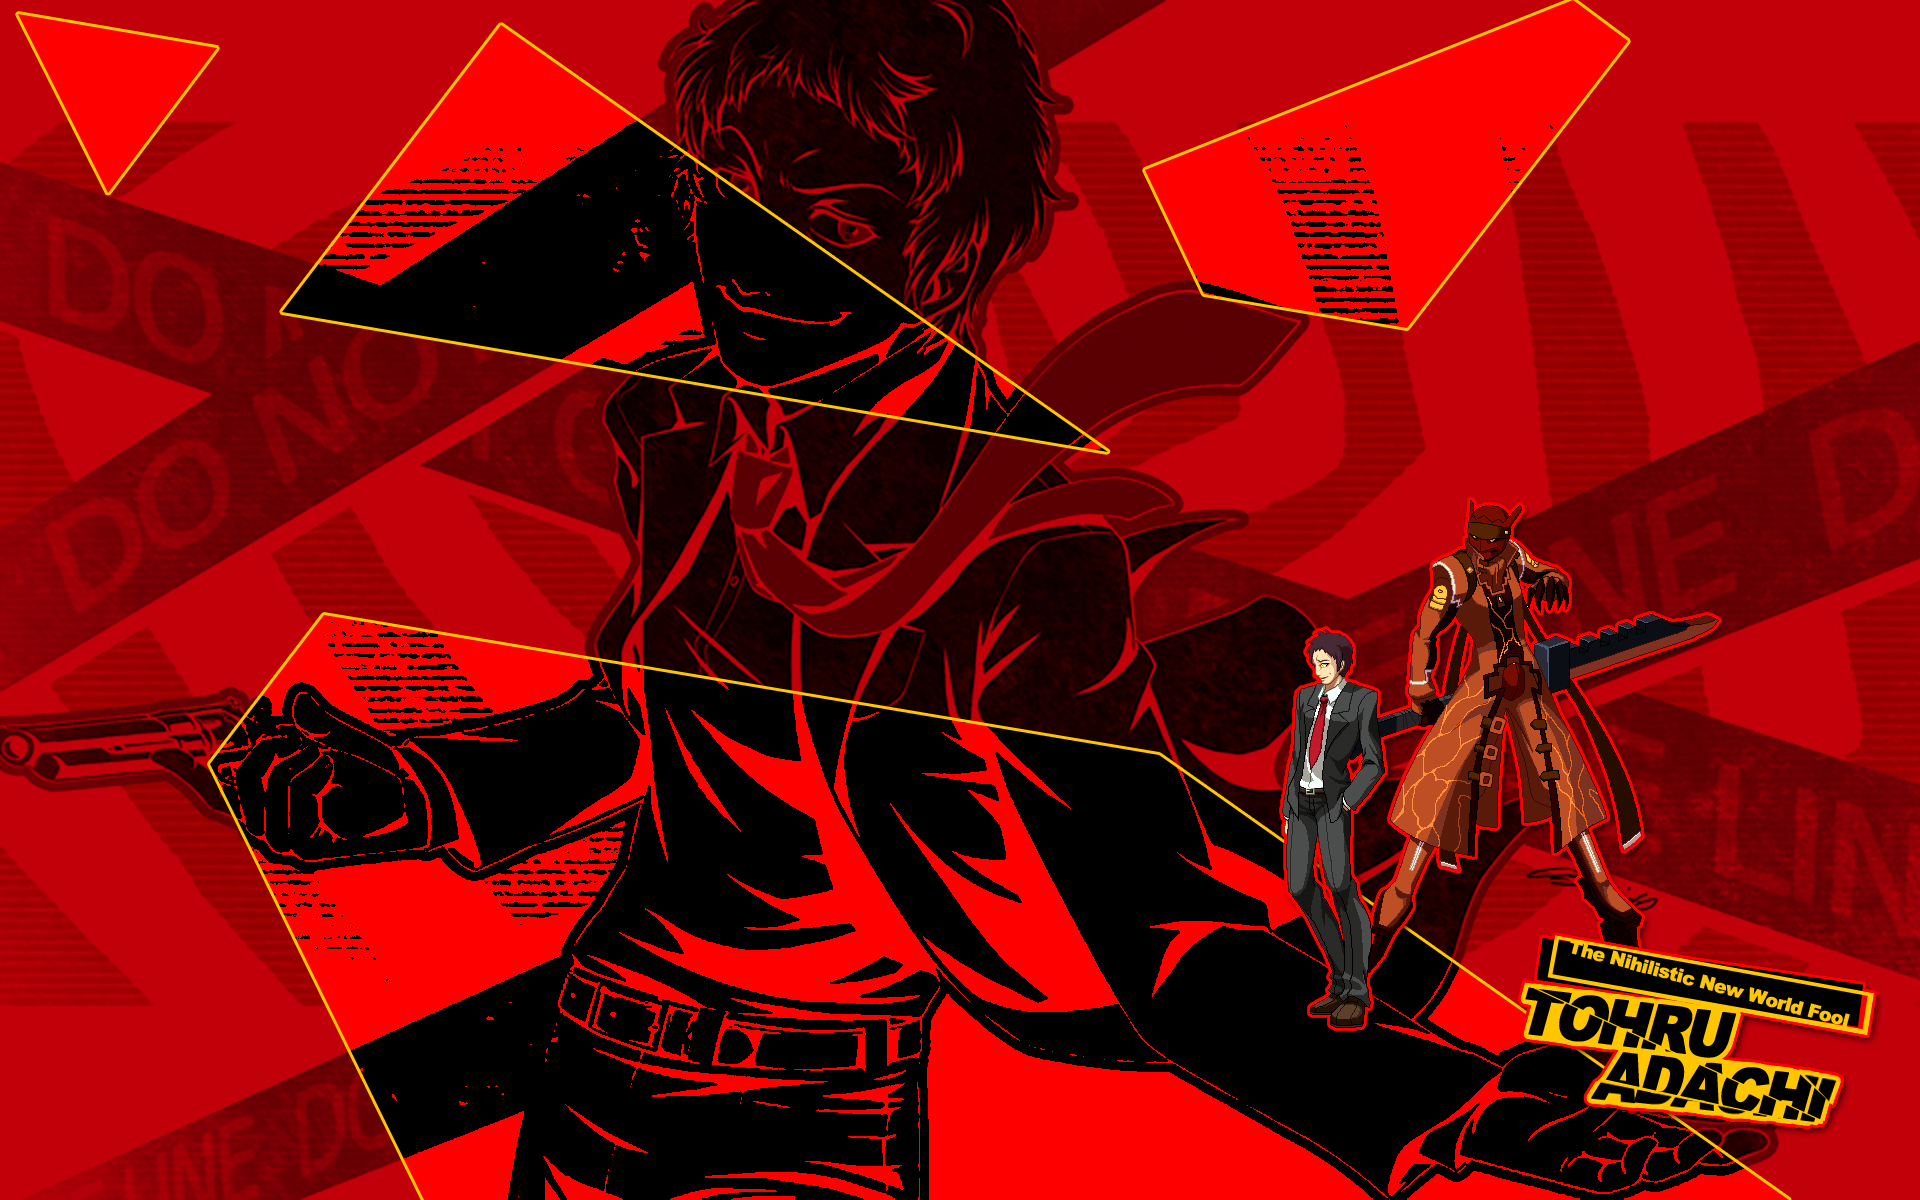 Adachi Persona 4 Uush Hd Wallpaper For Pc Ps3 By Seraharcana On Deviantart